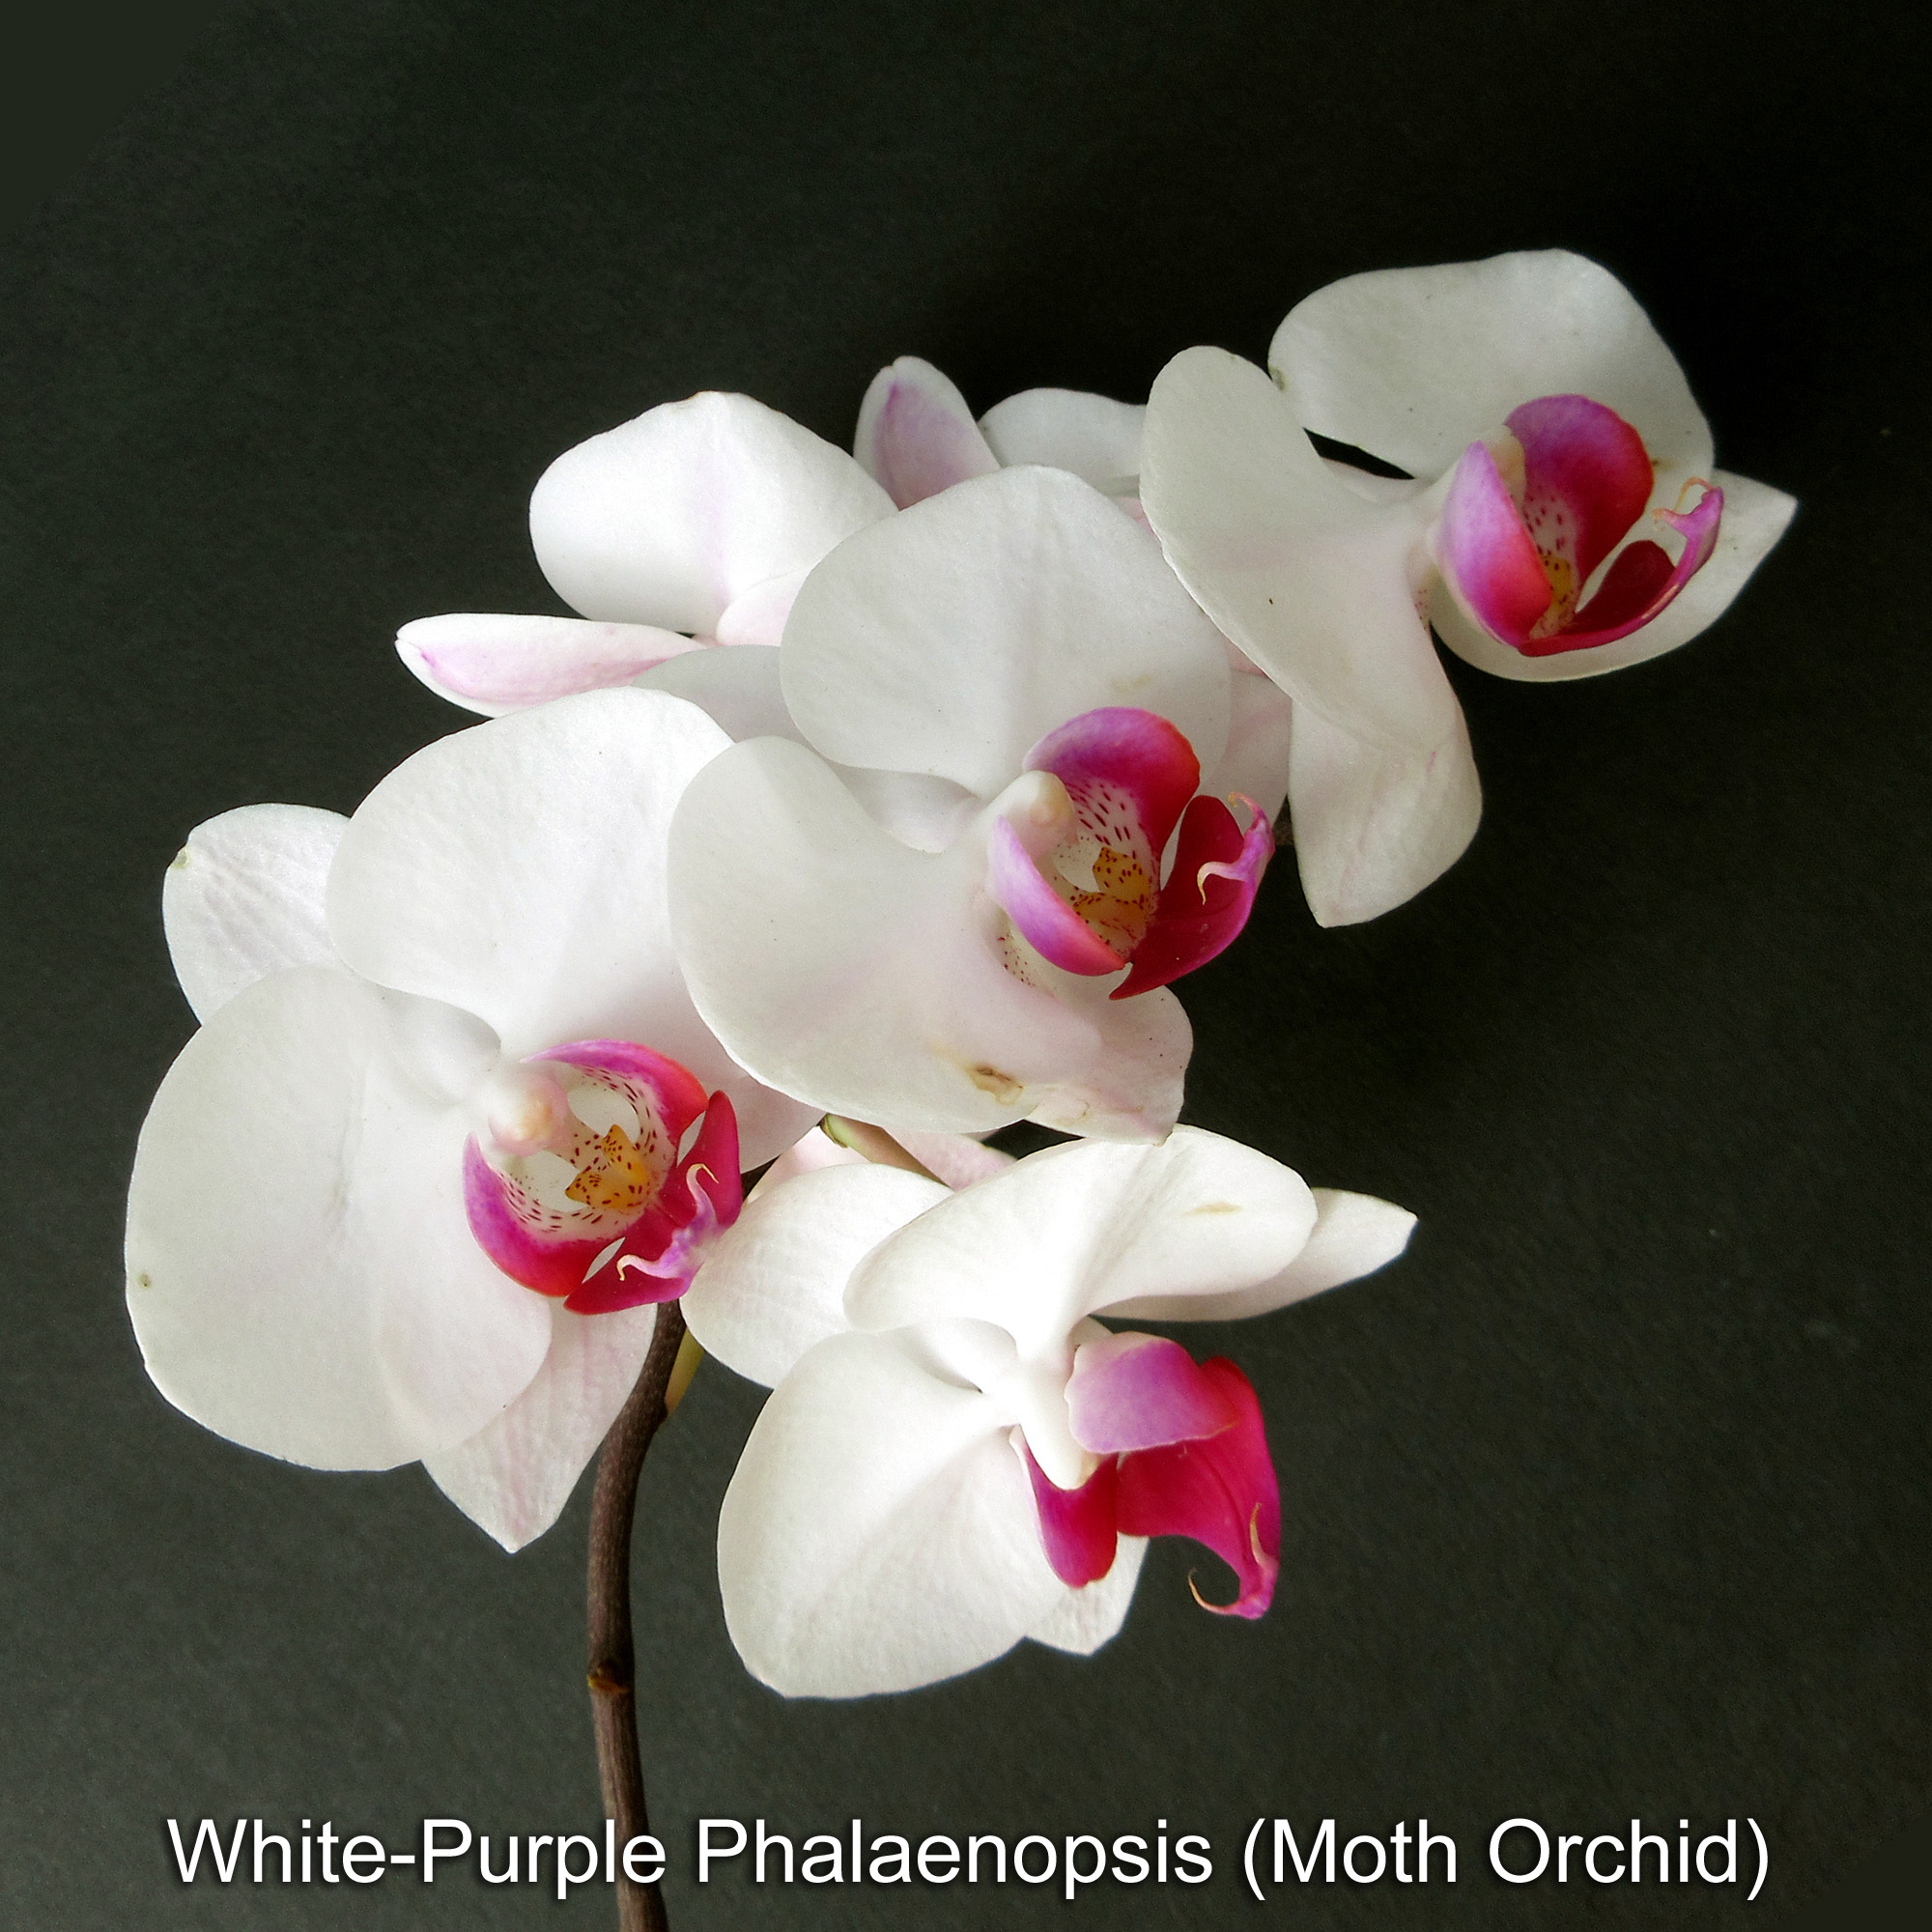 a White-Purple Phalaenopsis (Moth Orchid) in Borneo